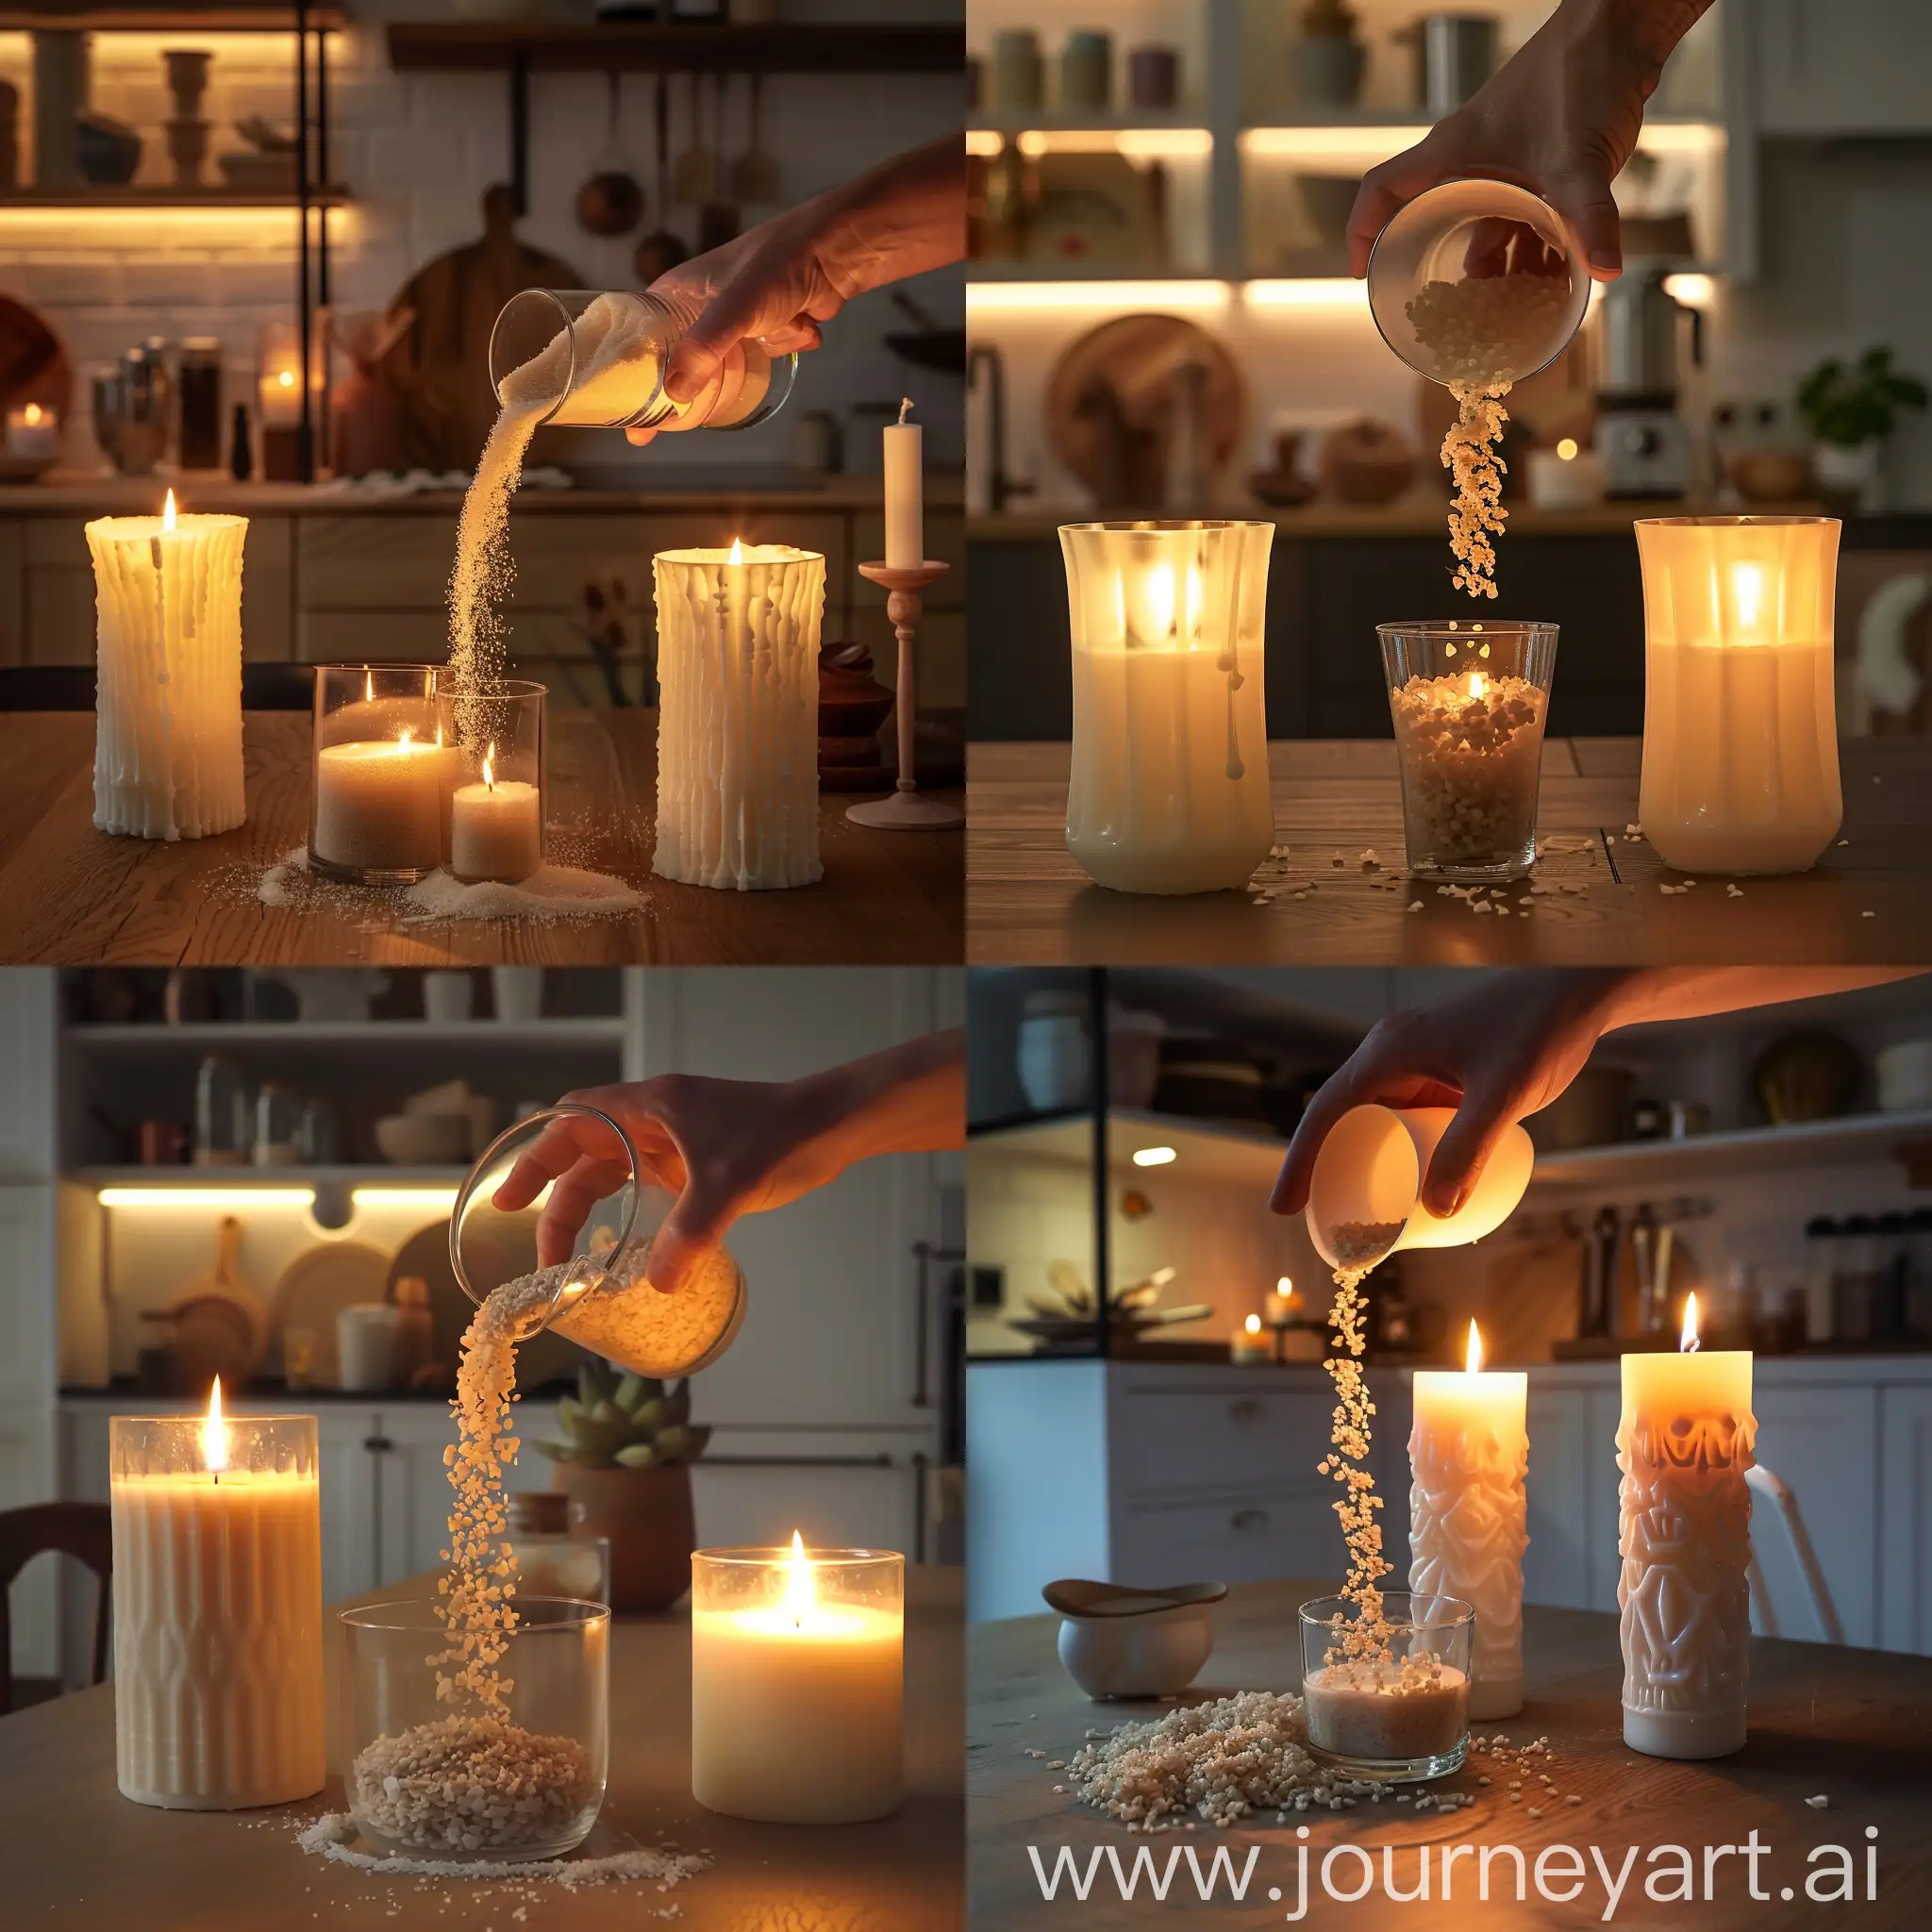 Candlelit-Kitchen-Scene-Wax-Pouring-and-Illuminated-Candles